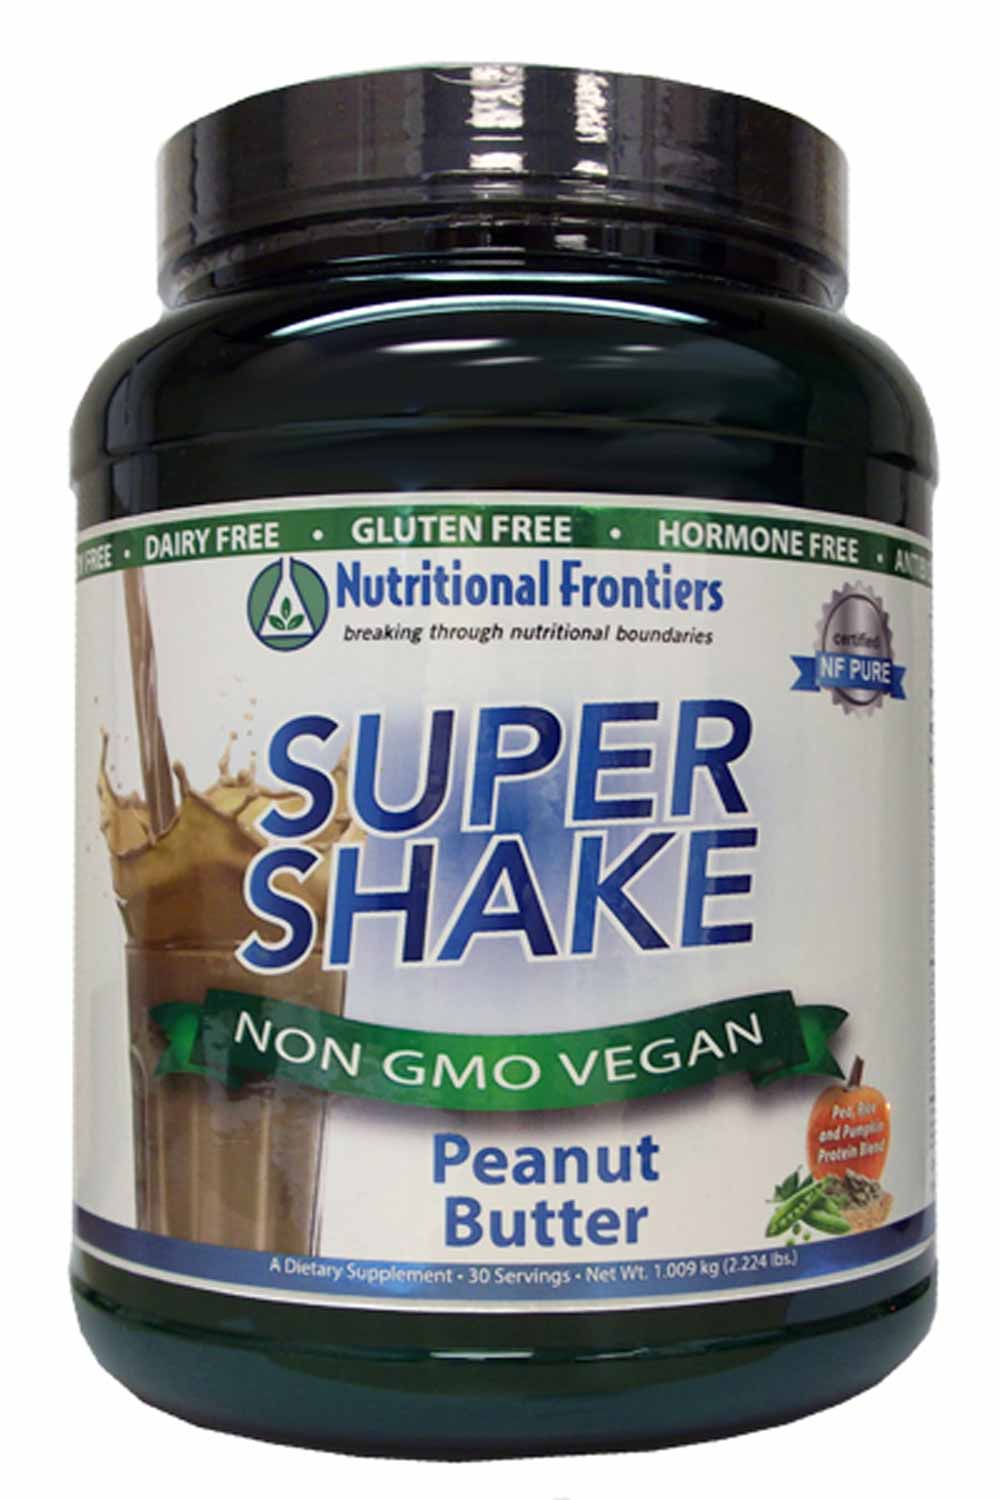 Nutritional Frontiers Super Shake Peanut Butter